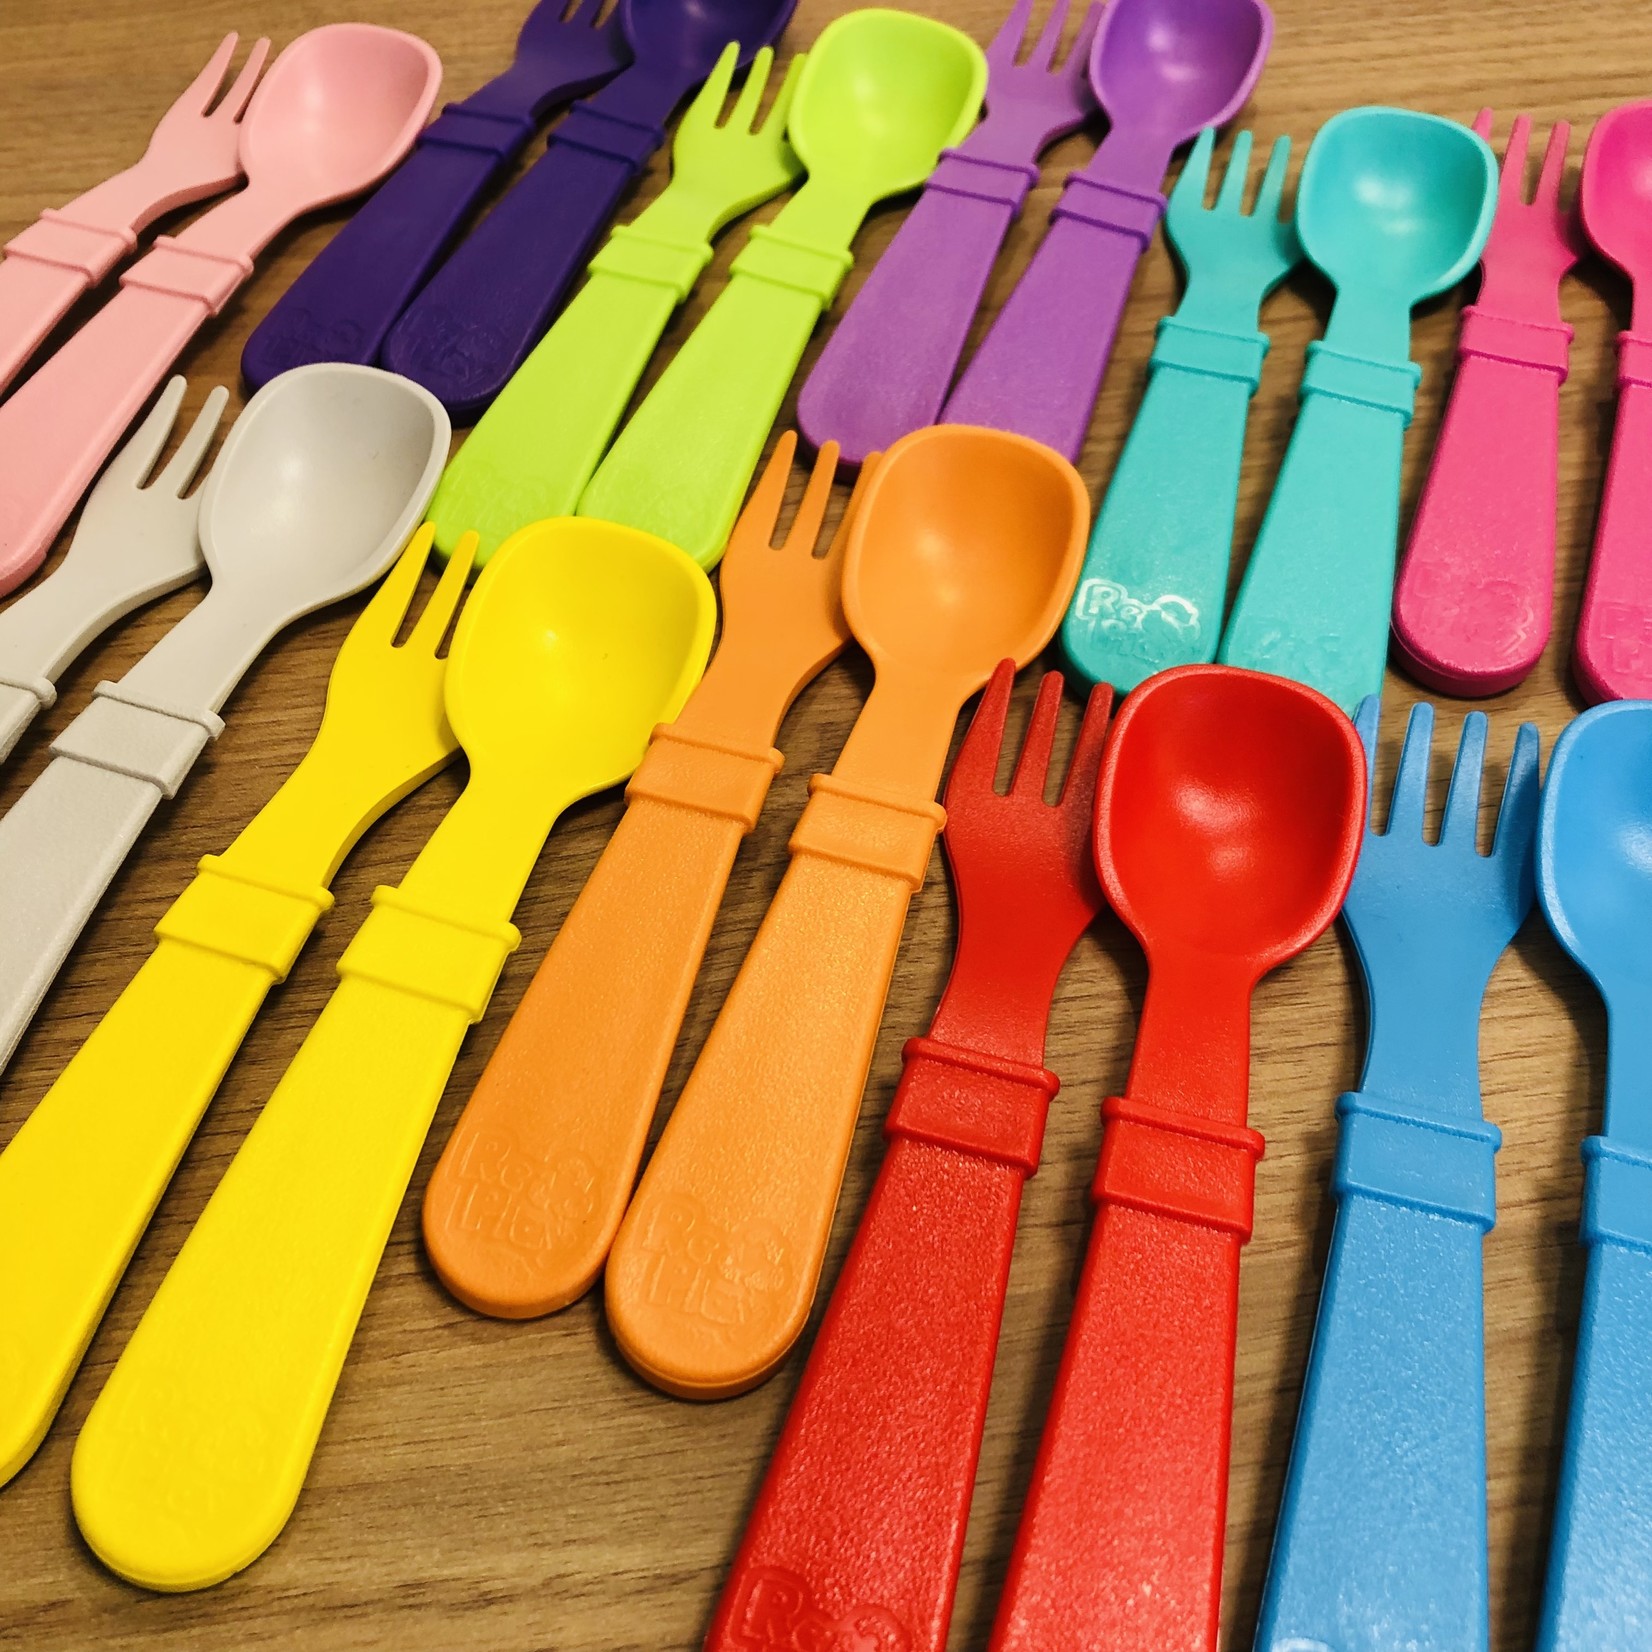 Replay Replay Cutlery Spoon and Fork Set